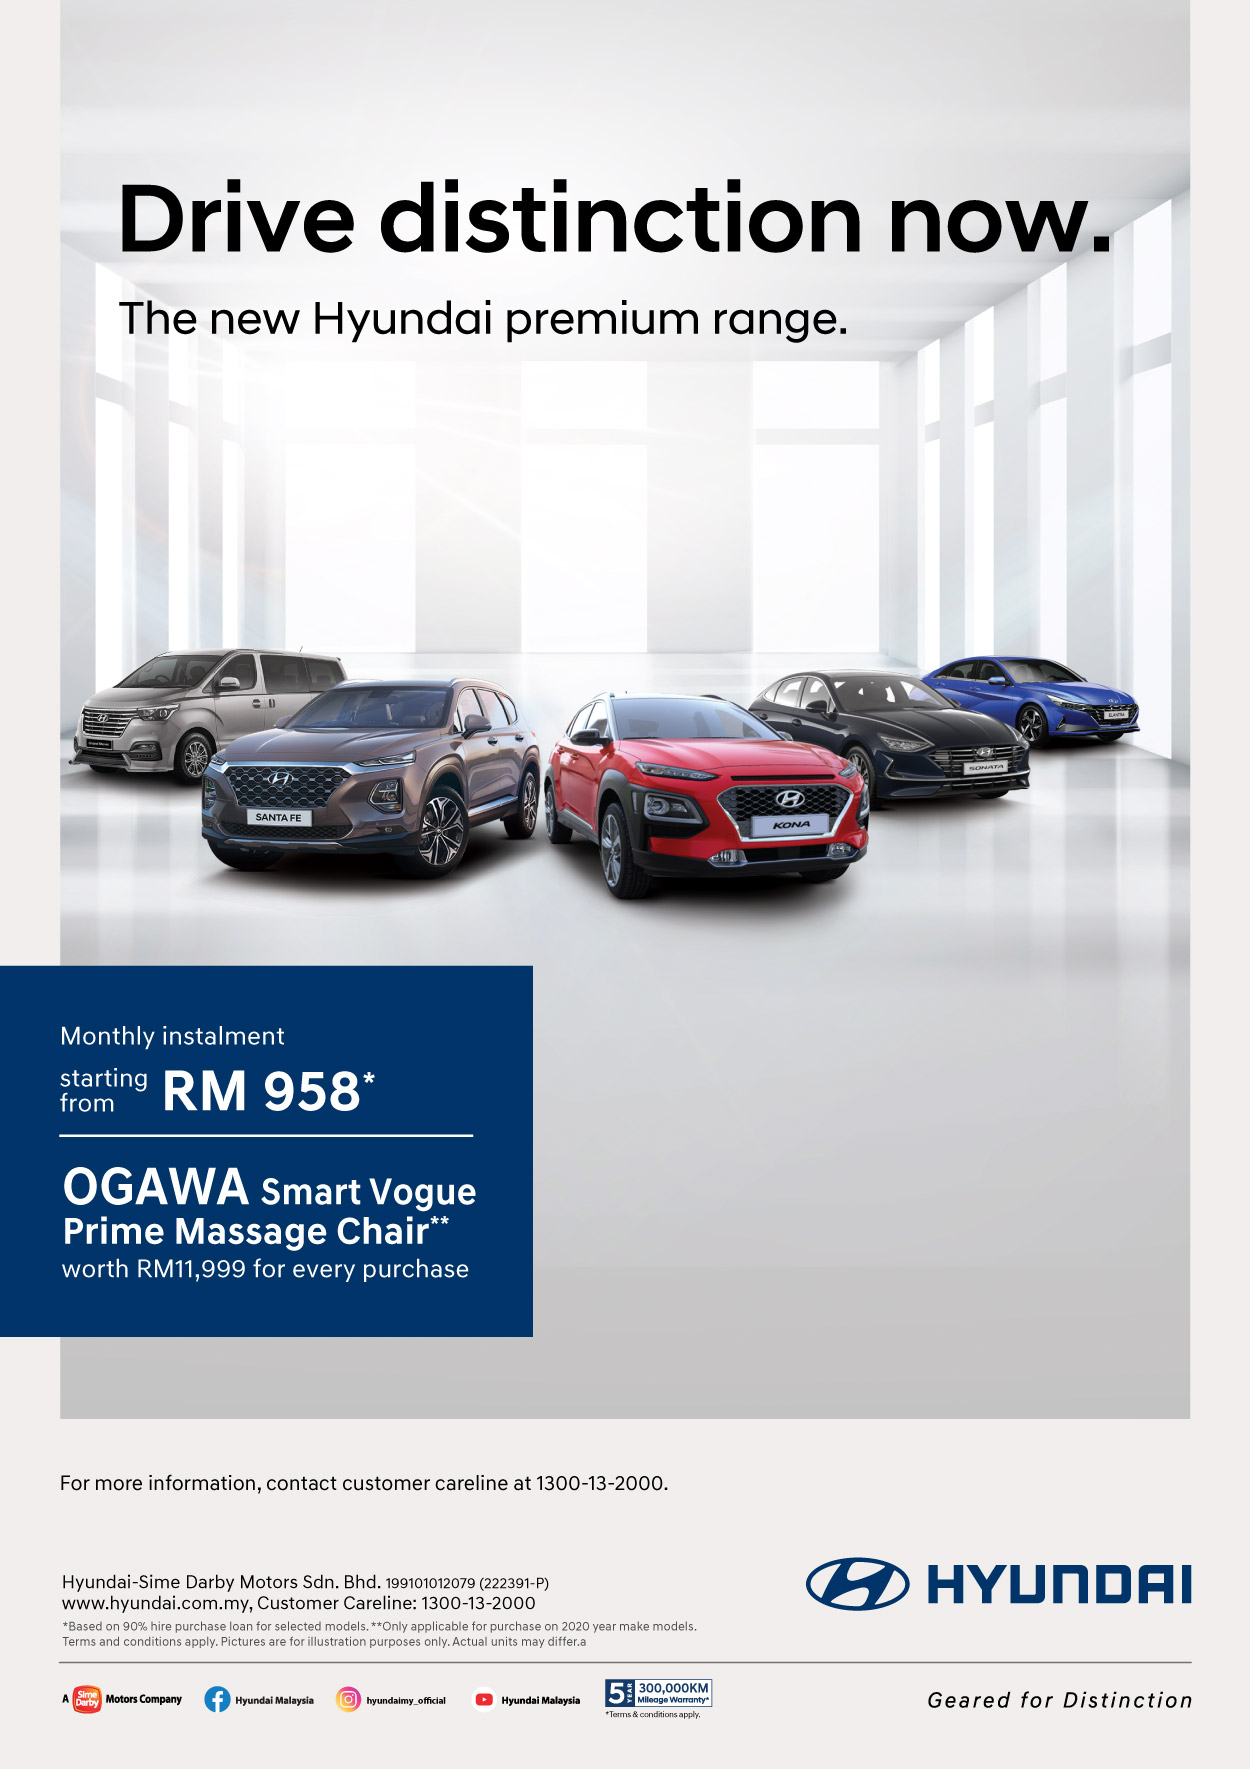 Drive distinction now | The new Hyundai premium range | Monthly instalment starting from RM958* | Ogawa Smart Vogue Prime Massage Chair** worth RM11,999 for every purchase. For more information, contact customer careline at 1300-13-2000. Terms & conditiona apply.